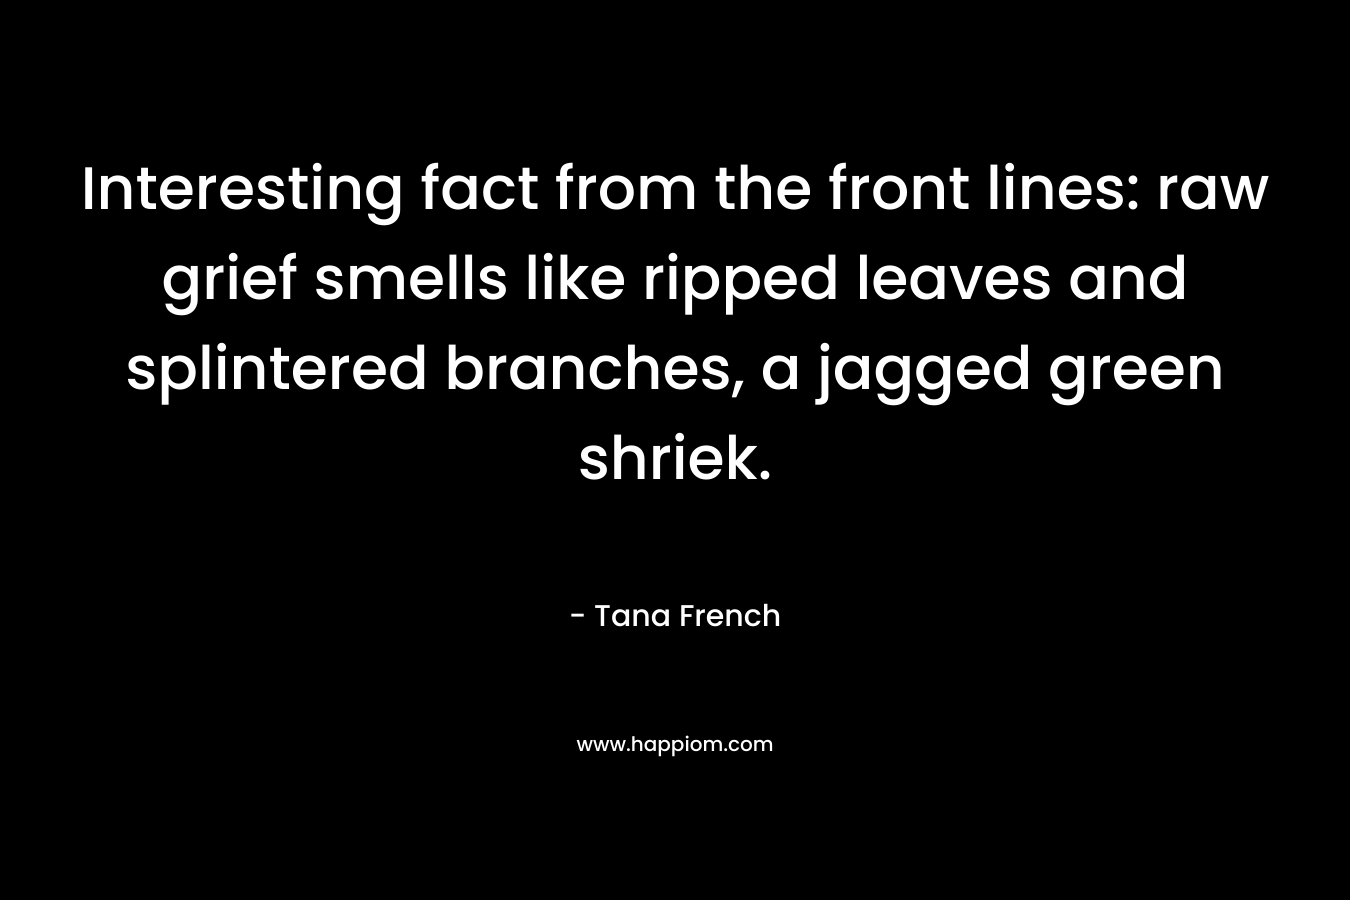 Interesting fact from the front lines: raw grief smells like ripped leaves and splintered branches, a jagged green shriek.